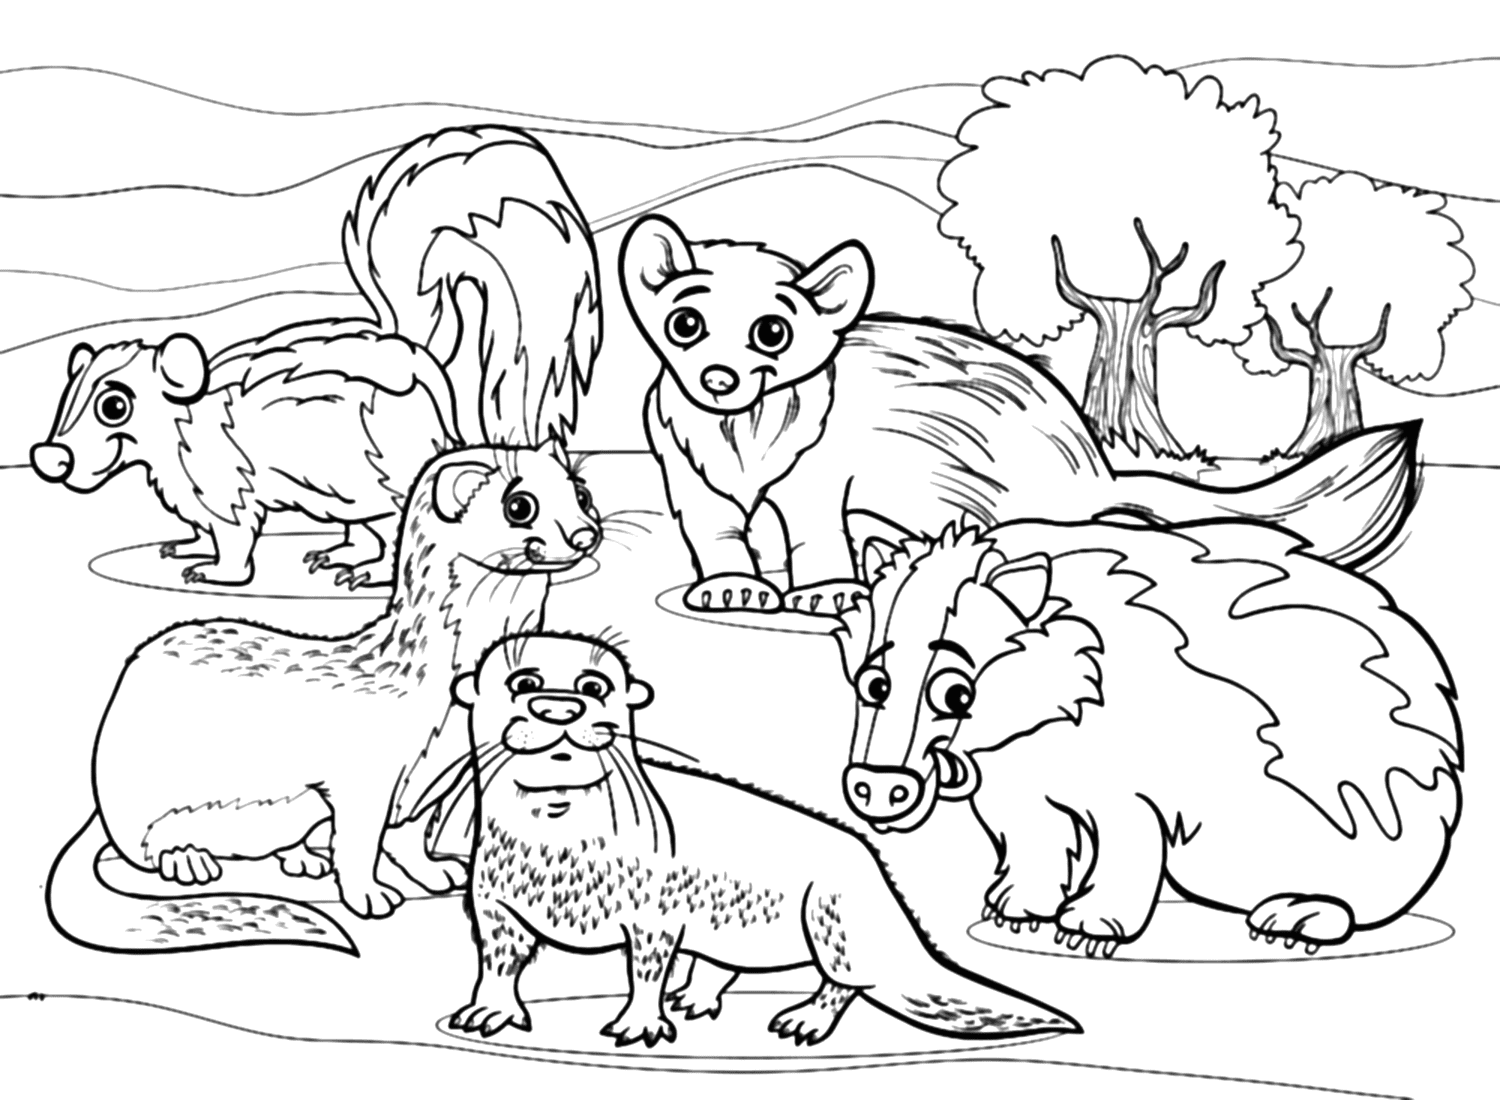 Badger Coloring Page - Free Printable Coloring Pages